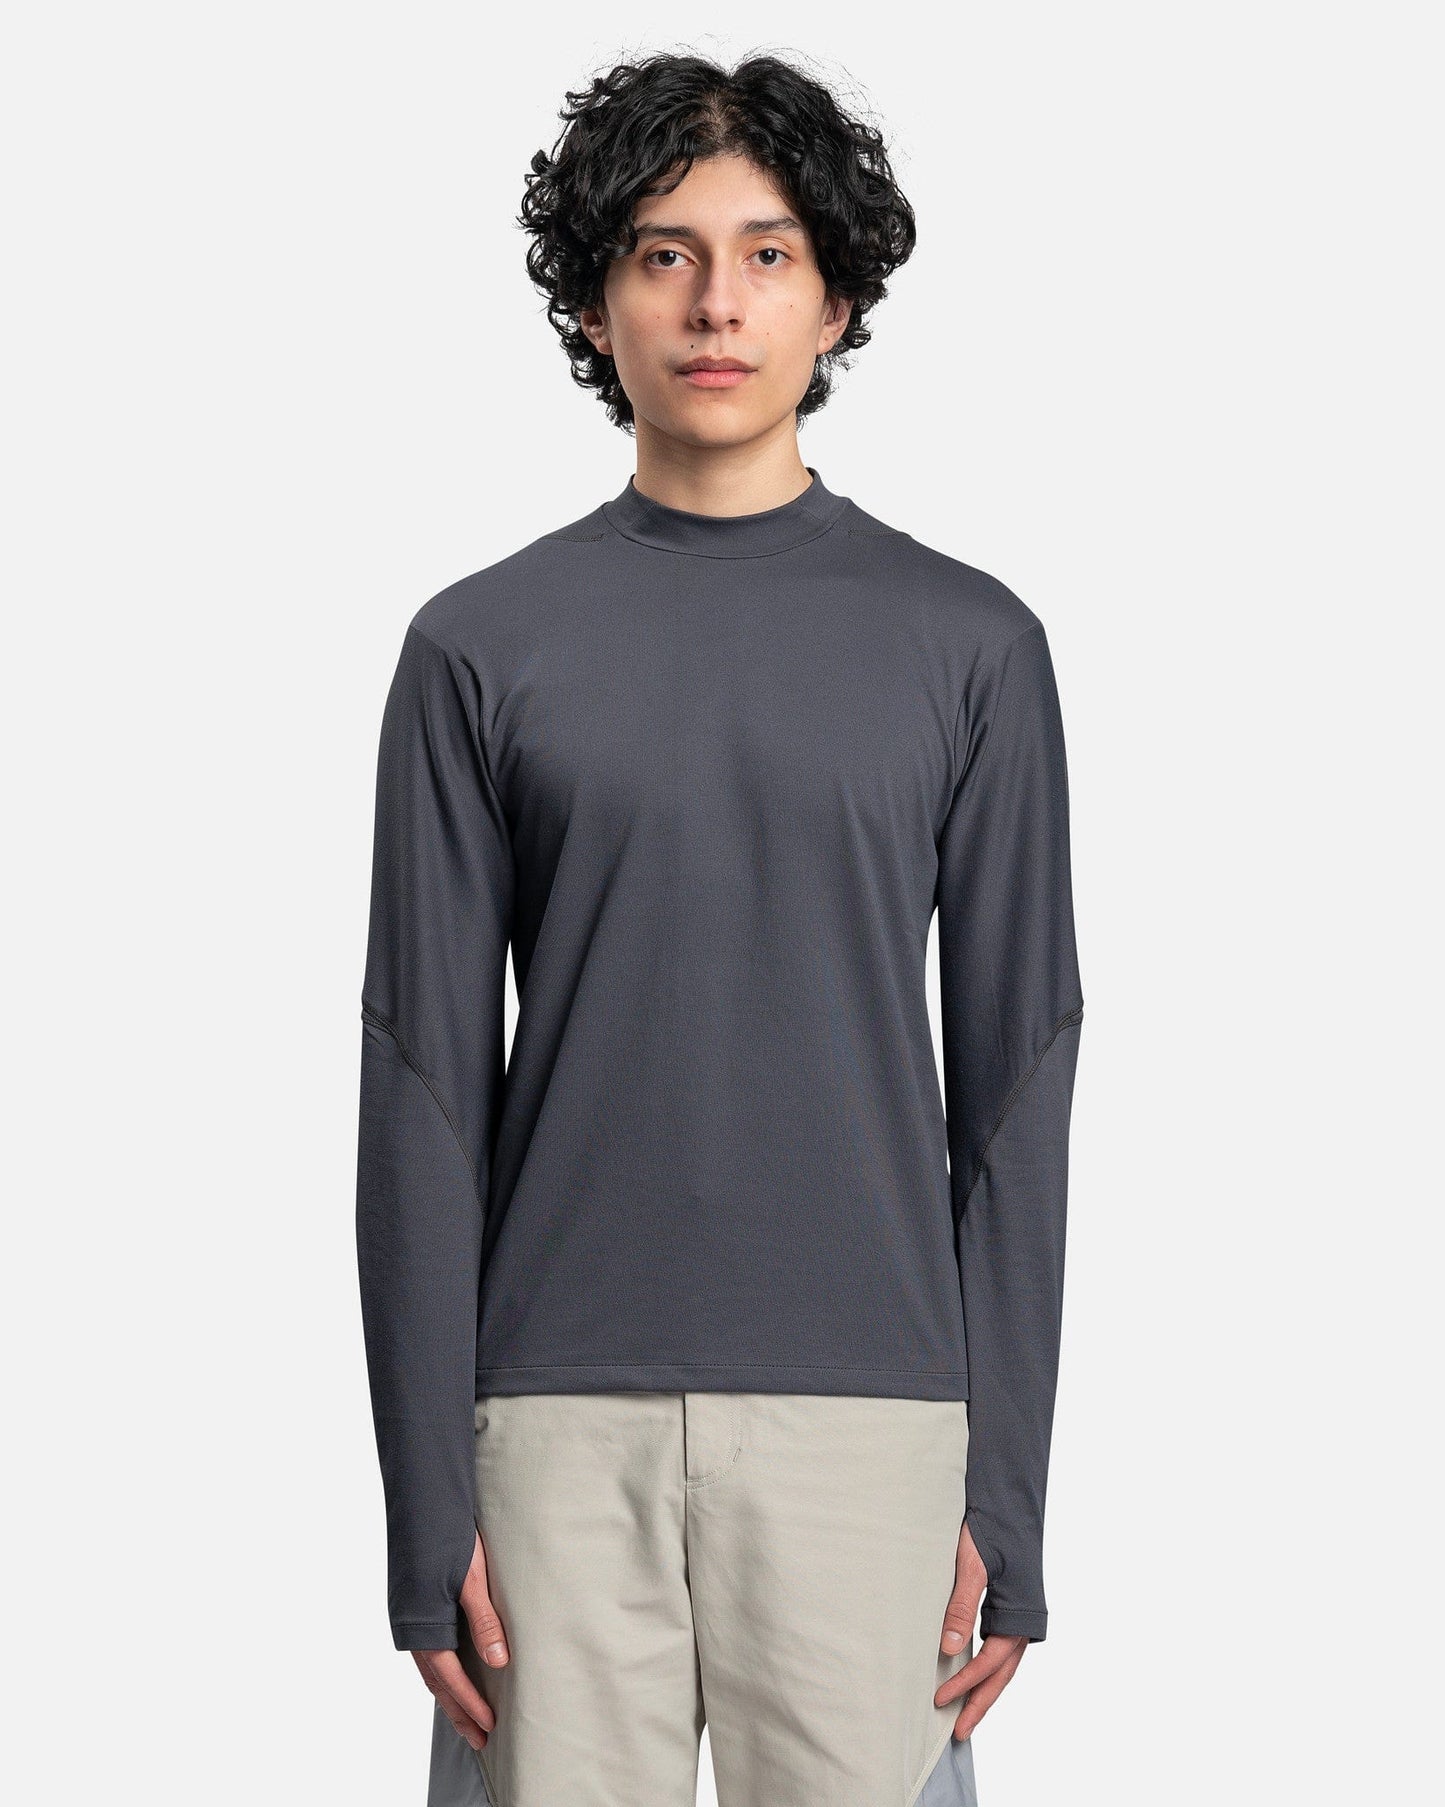 POST ARCHIVE FACTION (P.A.F) Men's T-Shirts 5.0 Long Sleeve Right T-Shirt in Charcoal